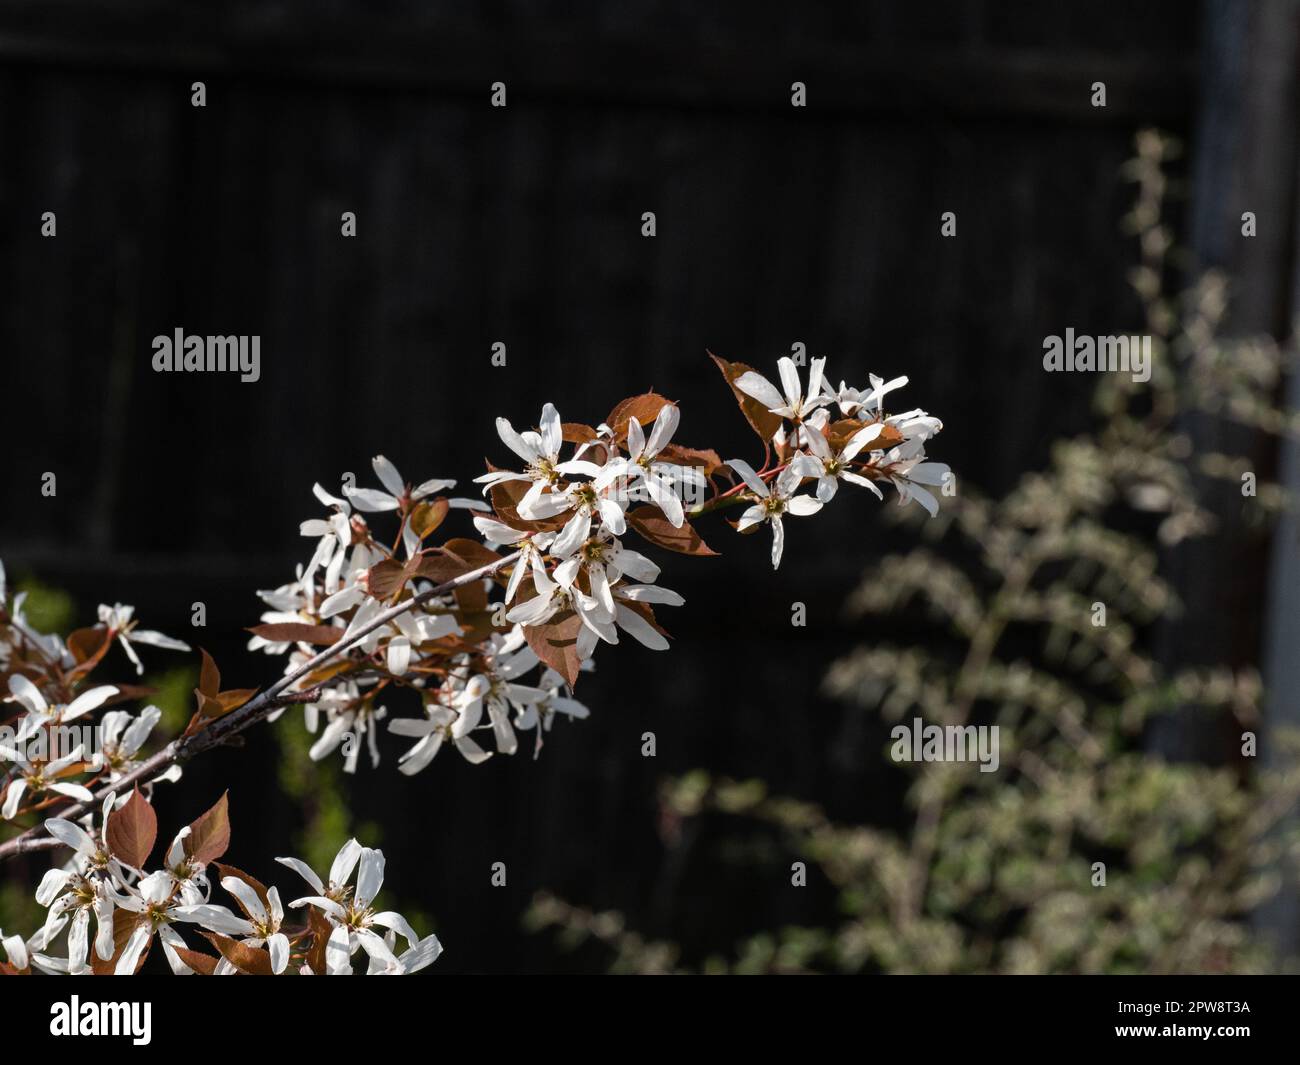 A branch of Amelanchier laevis R.J. Hilton covered in delicate white starry flowers Stock Photo